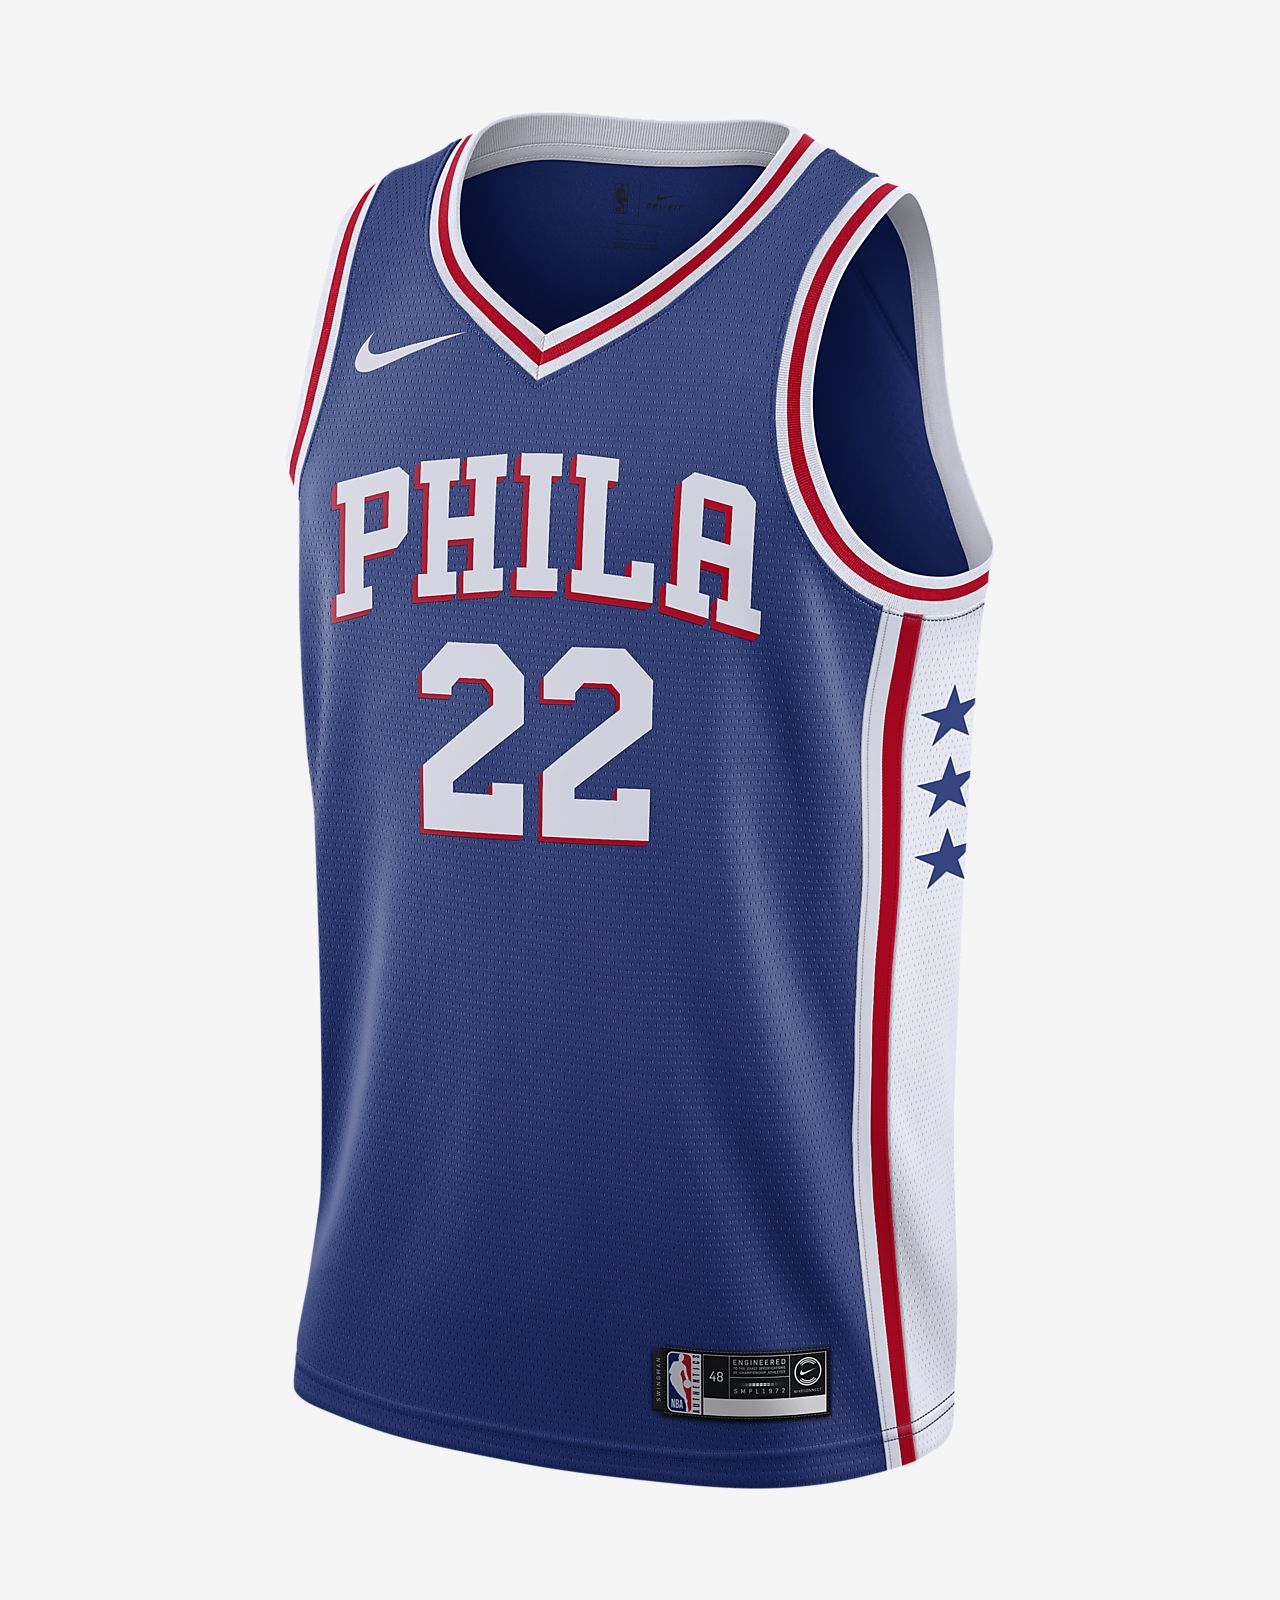 matisse thybulle jersey 76ers